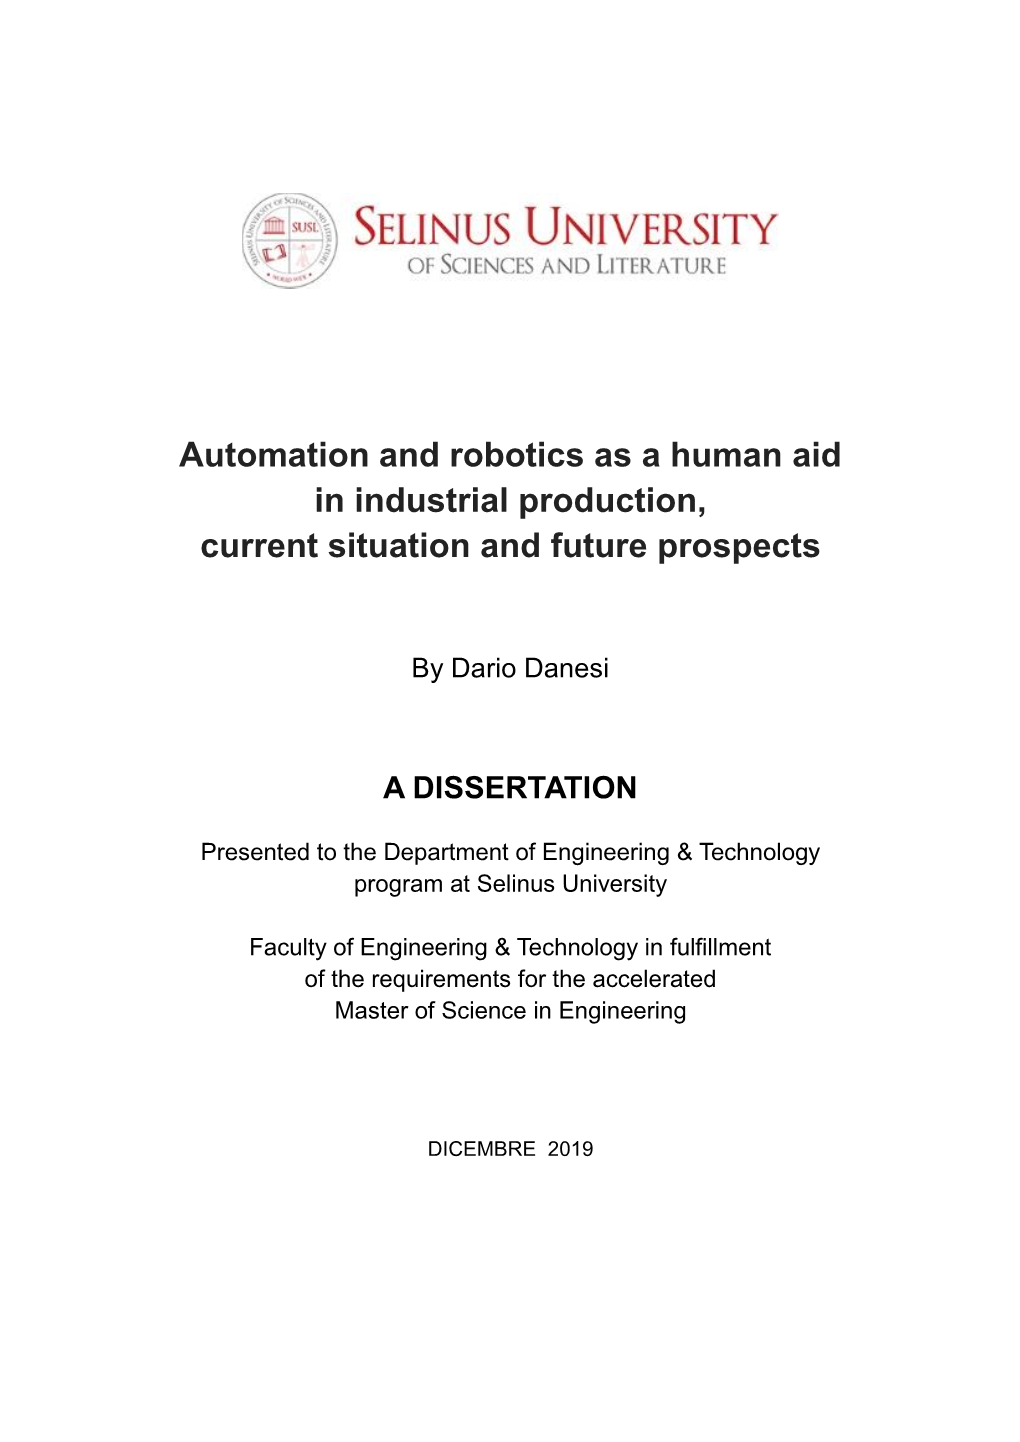 Automation and Robotics As a Human Aid in Industrial Production, Current Situation and Future Prospects